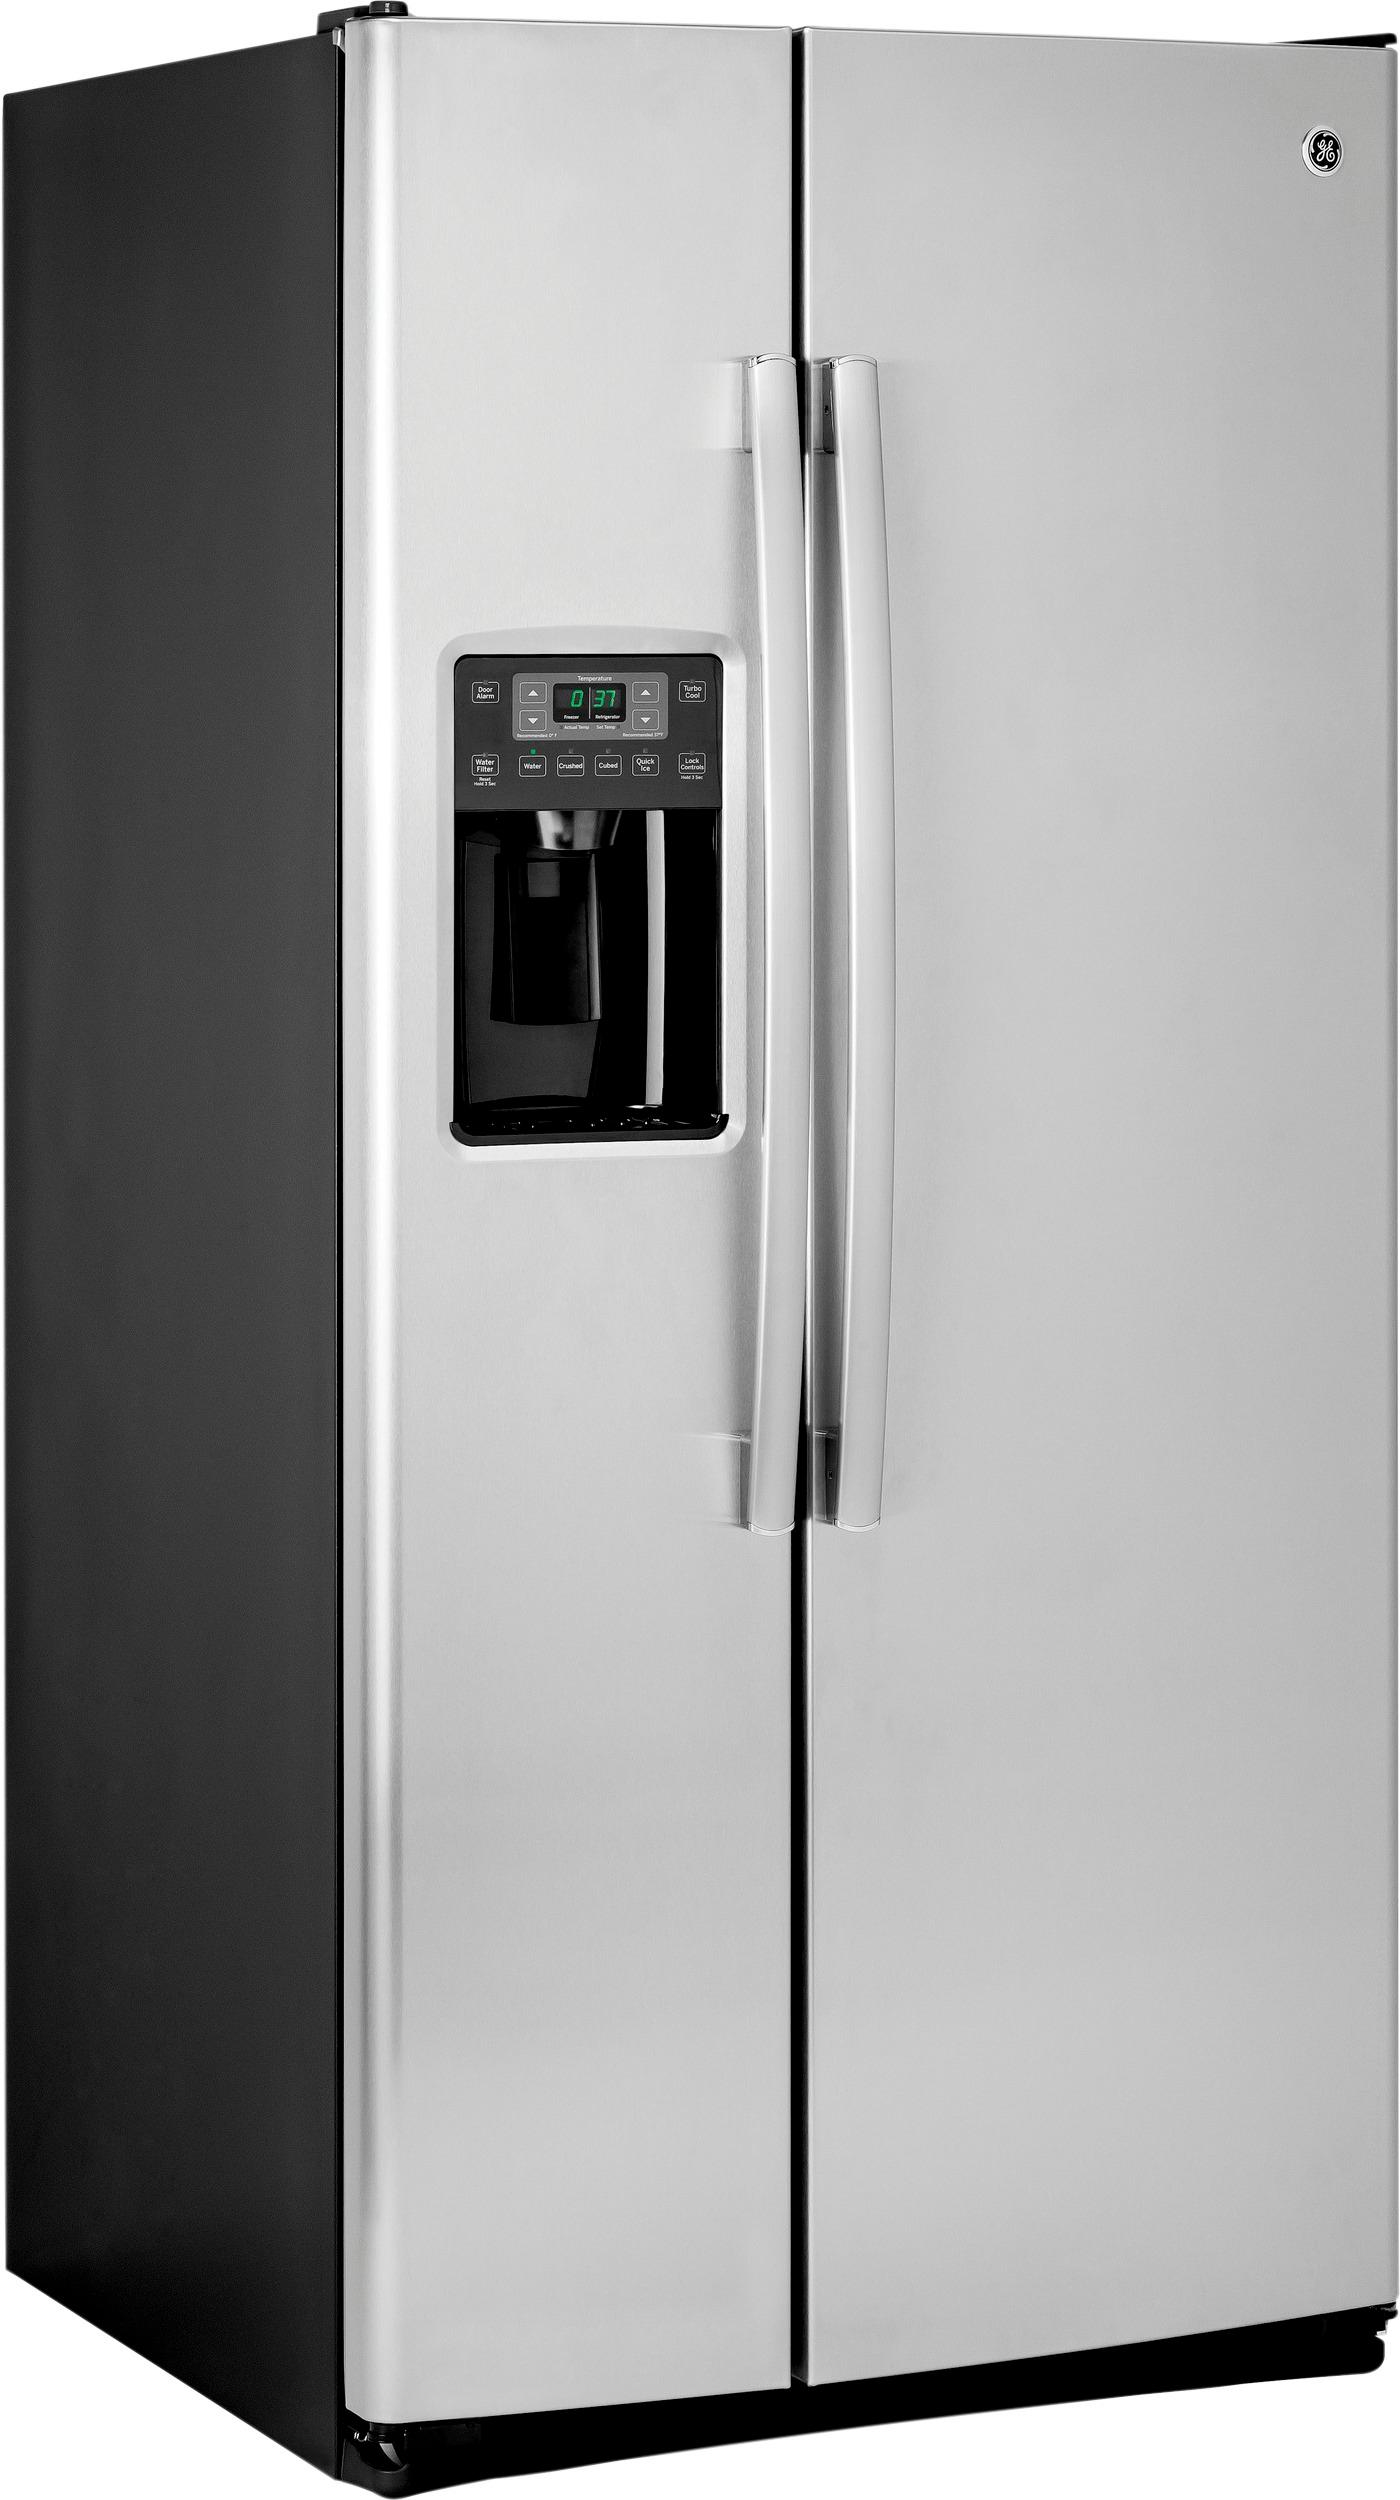 Angle View: GE - 23.0 Cu. Ft. Side-by-Side Refrigerator with External Ice & Water Dispenser - Stainless steel